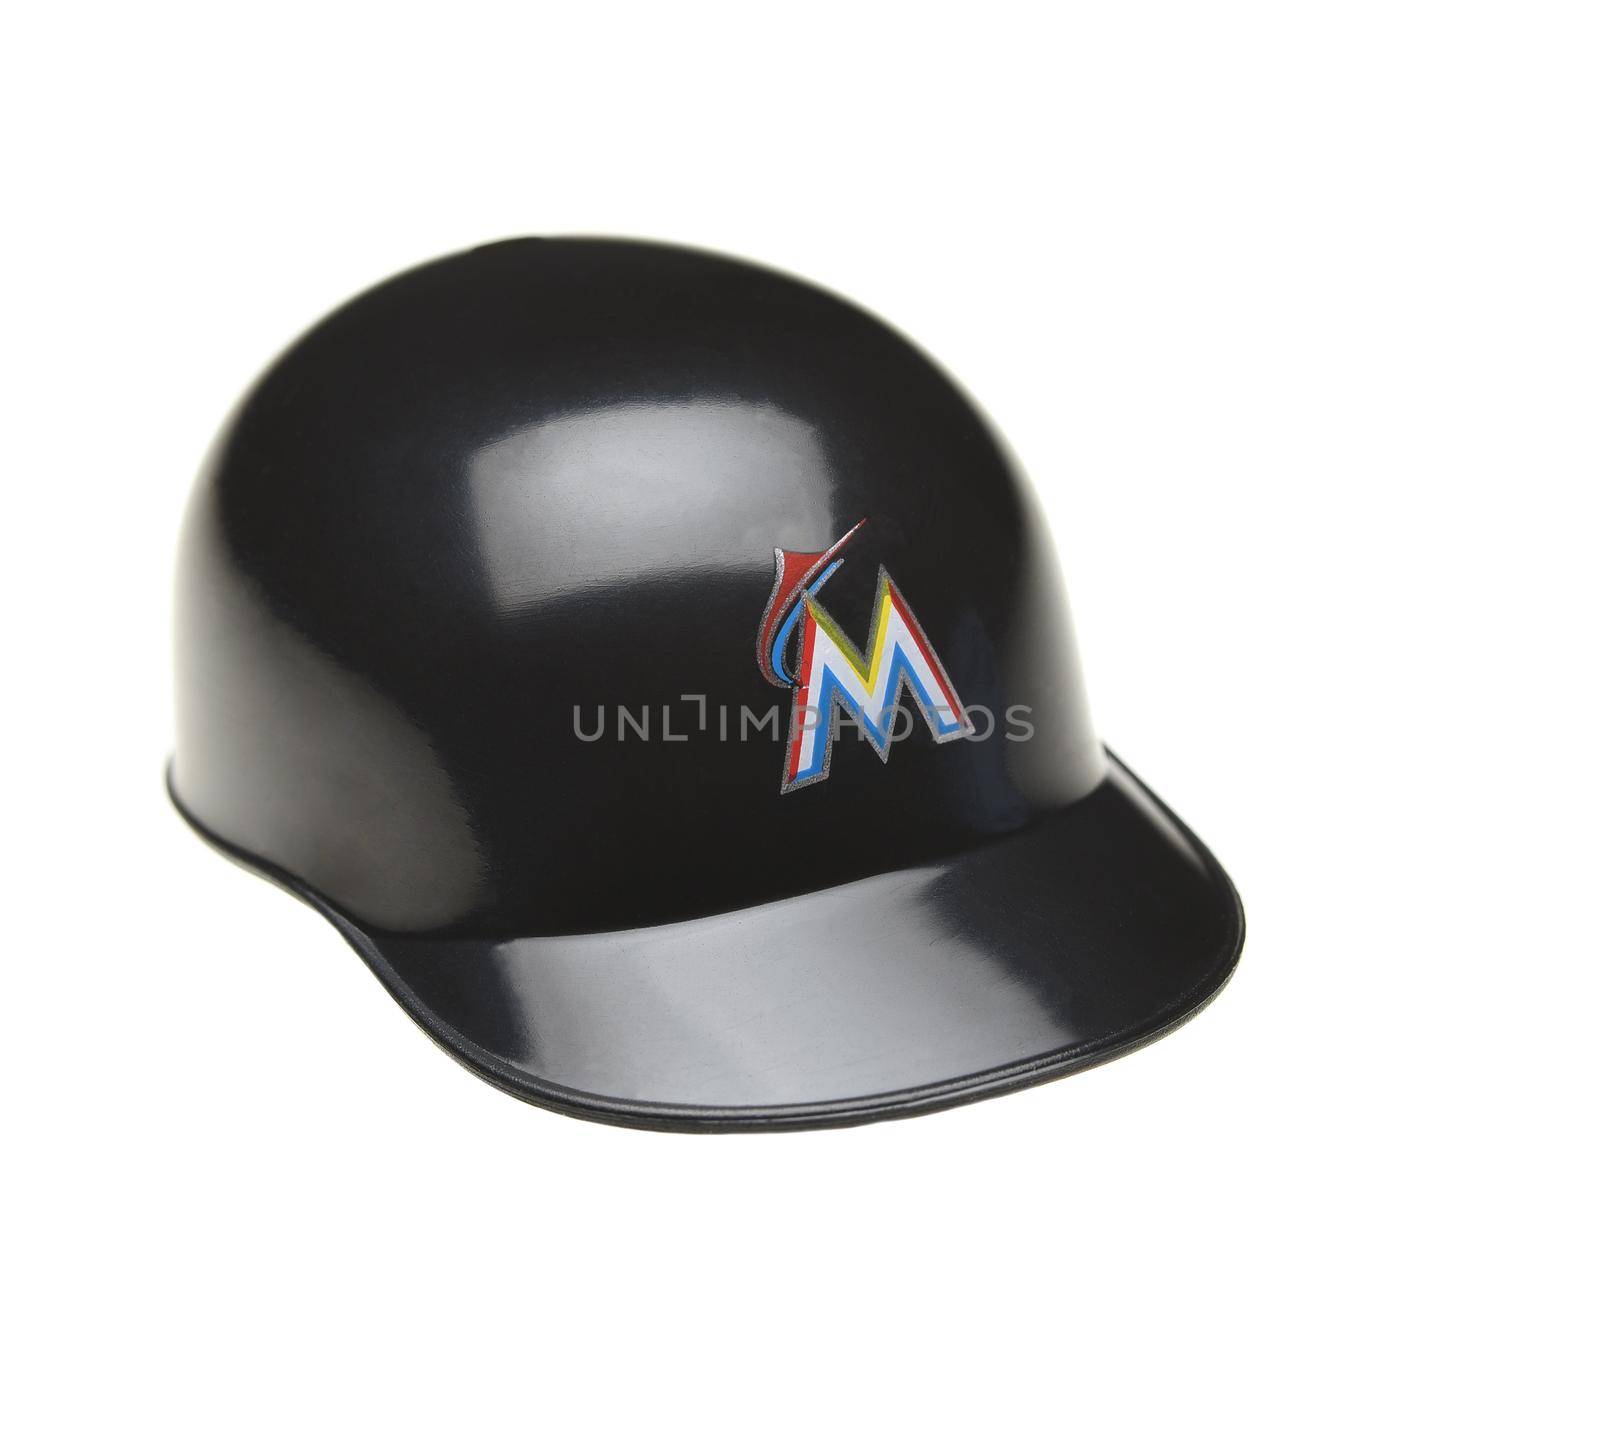 Closeup of a mini collectable batters helmet for the Miami Marlins by sCukrov